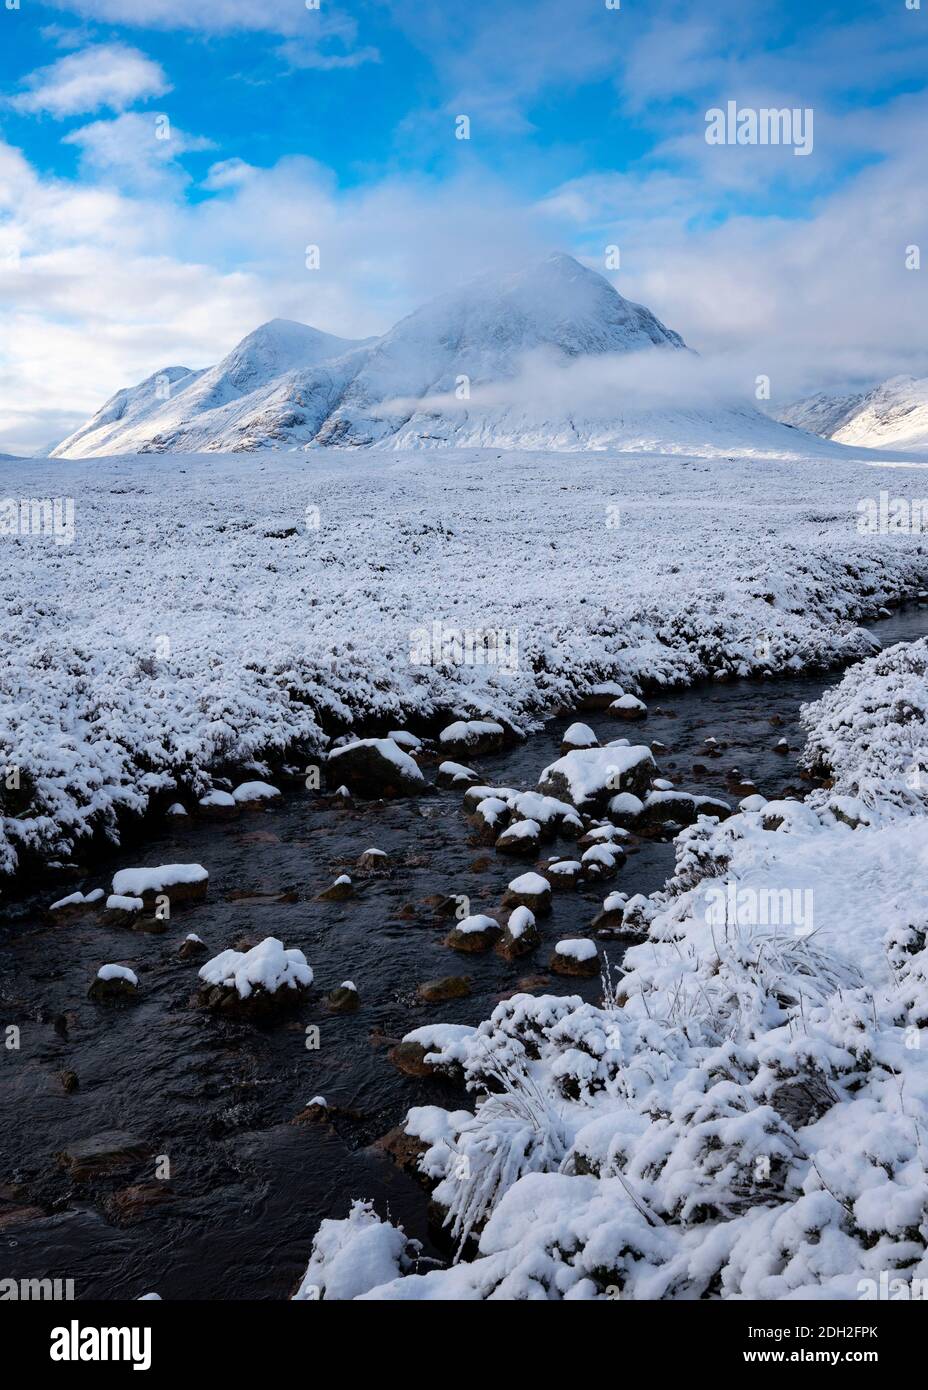 Winter view of snow covered Buachaille Etive Mor mountain and River Coupall in Glen Coe, Scotland, UK Stock Photo